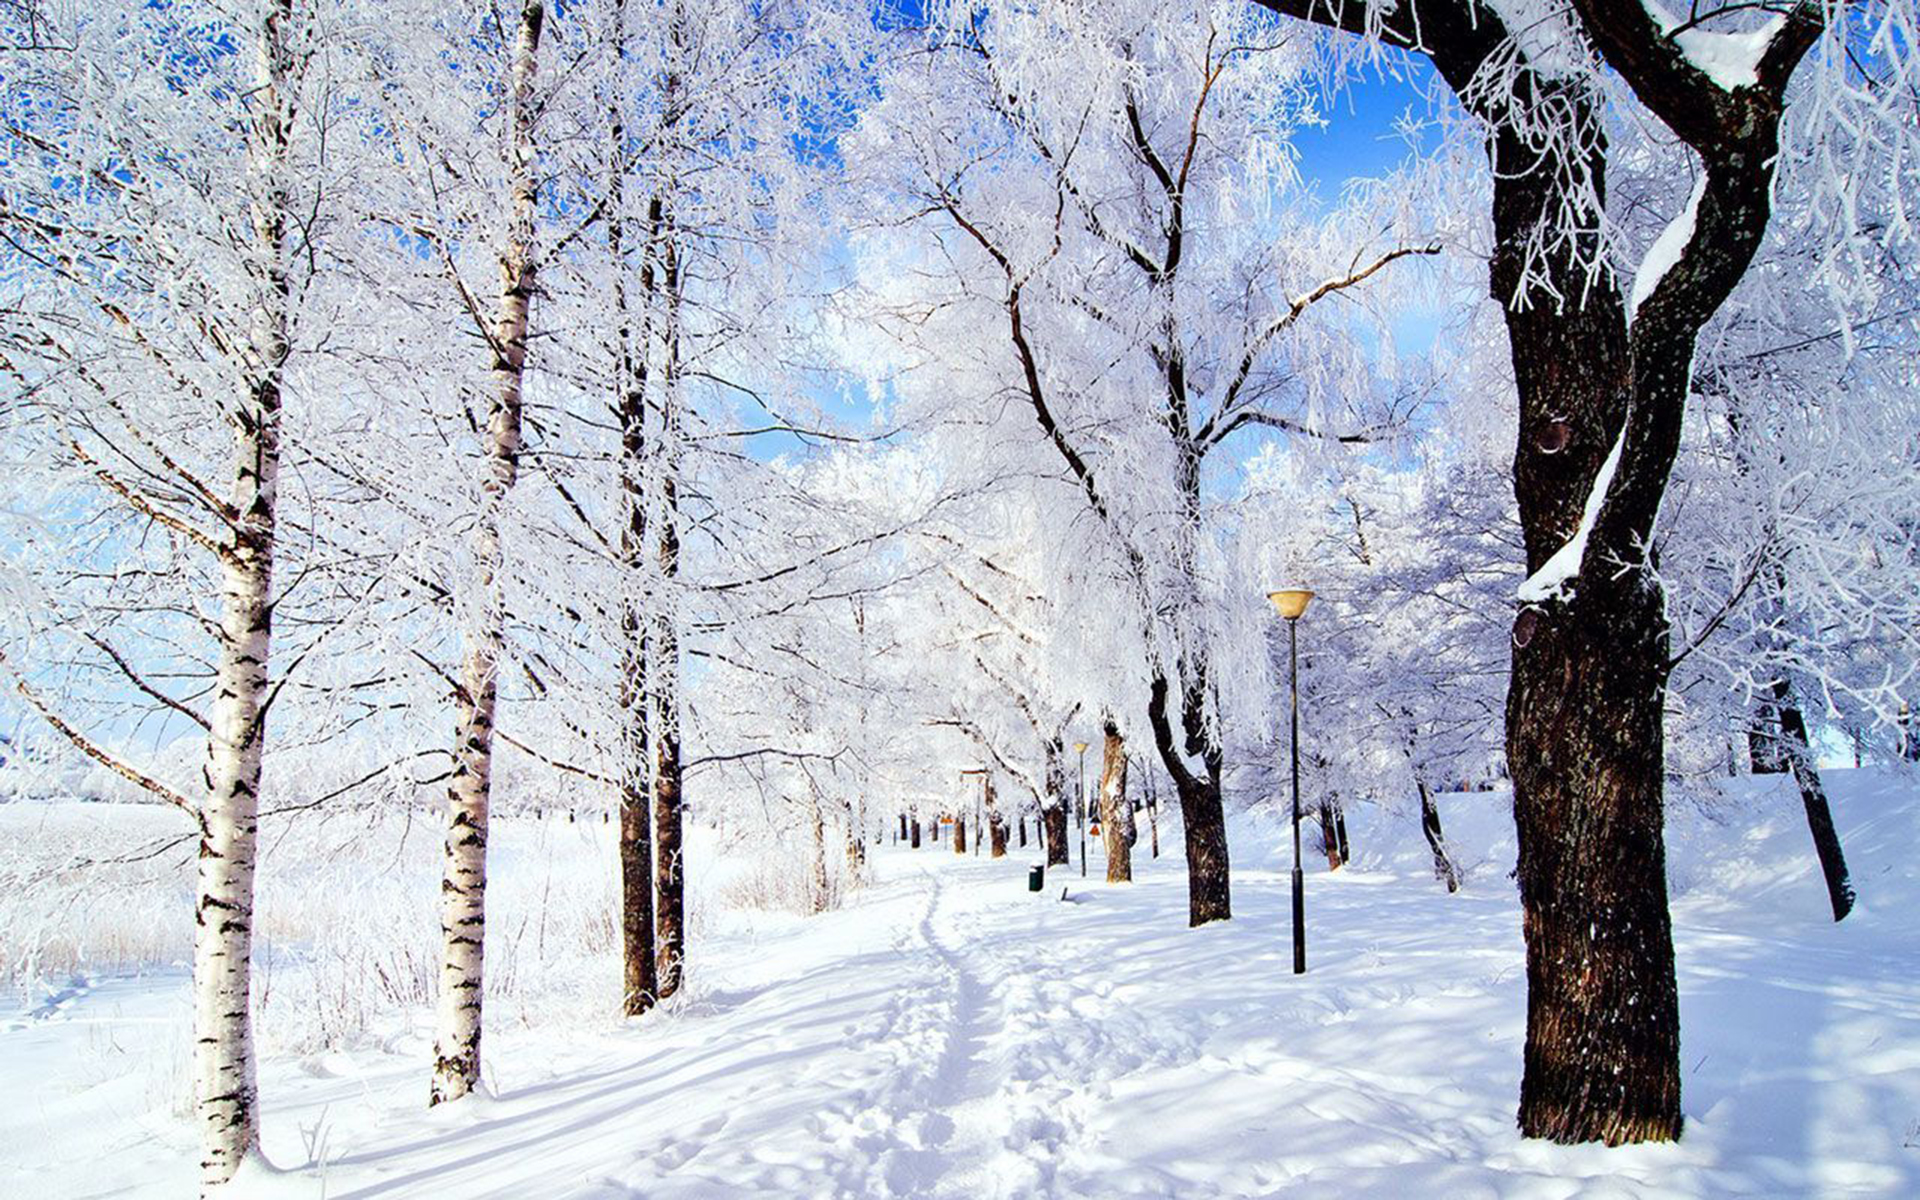 80 winter wallpapers and backgrounds to decorate your screen with